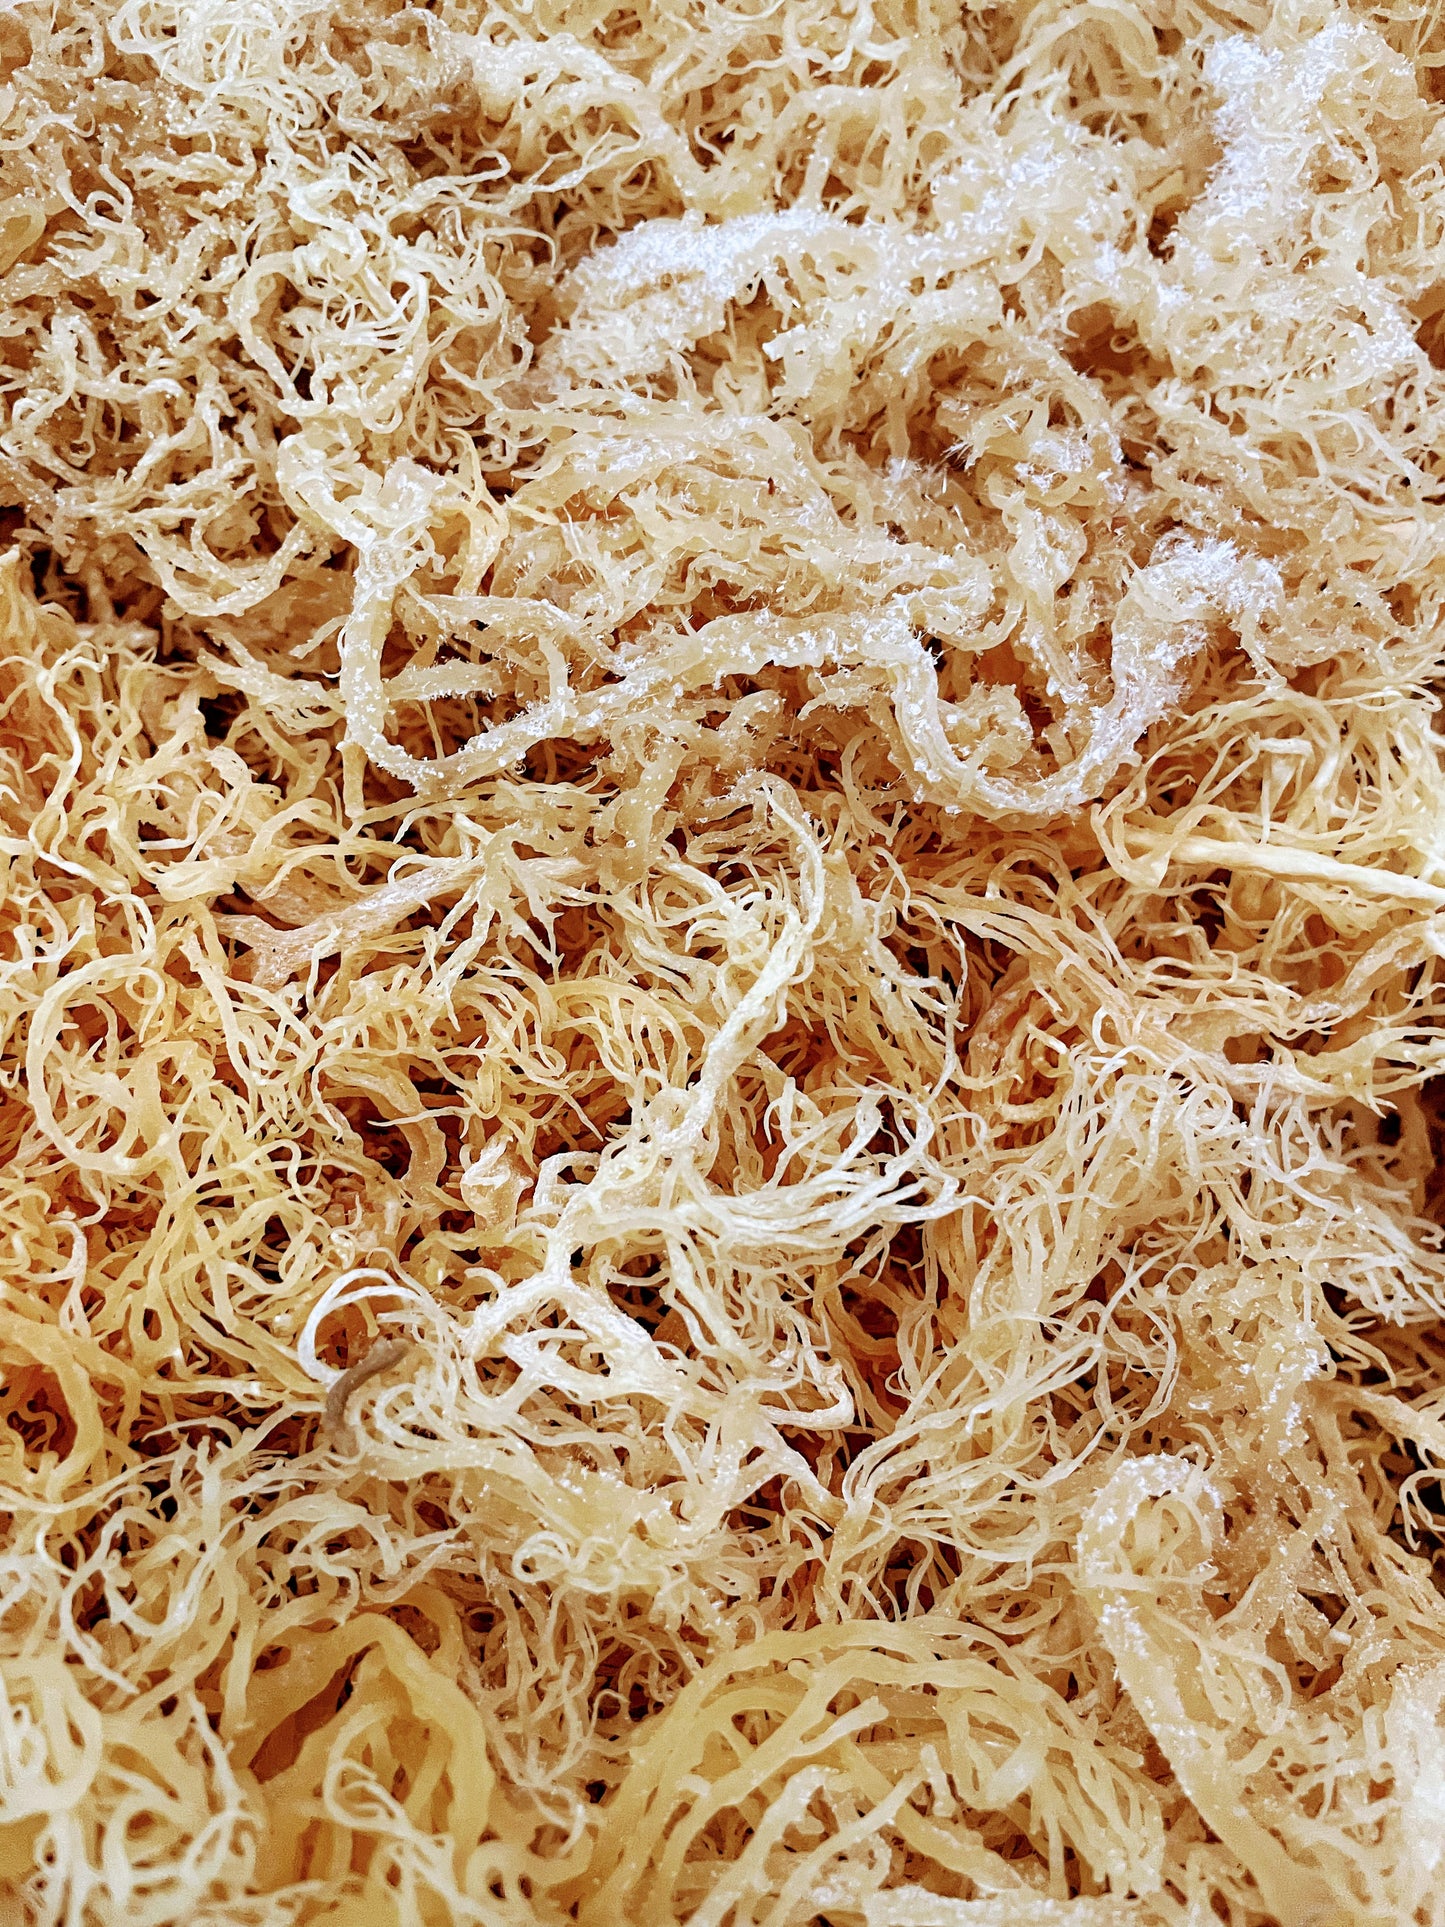 BULK WHOLESALE GOLD Raw Natural Sea Moss from St. Lucia | Wildcrafted | Superfood